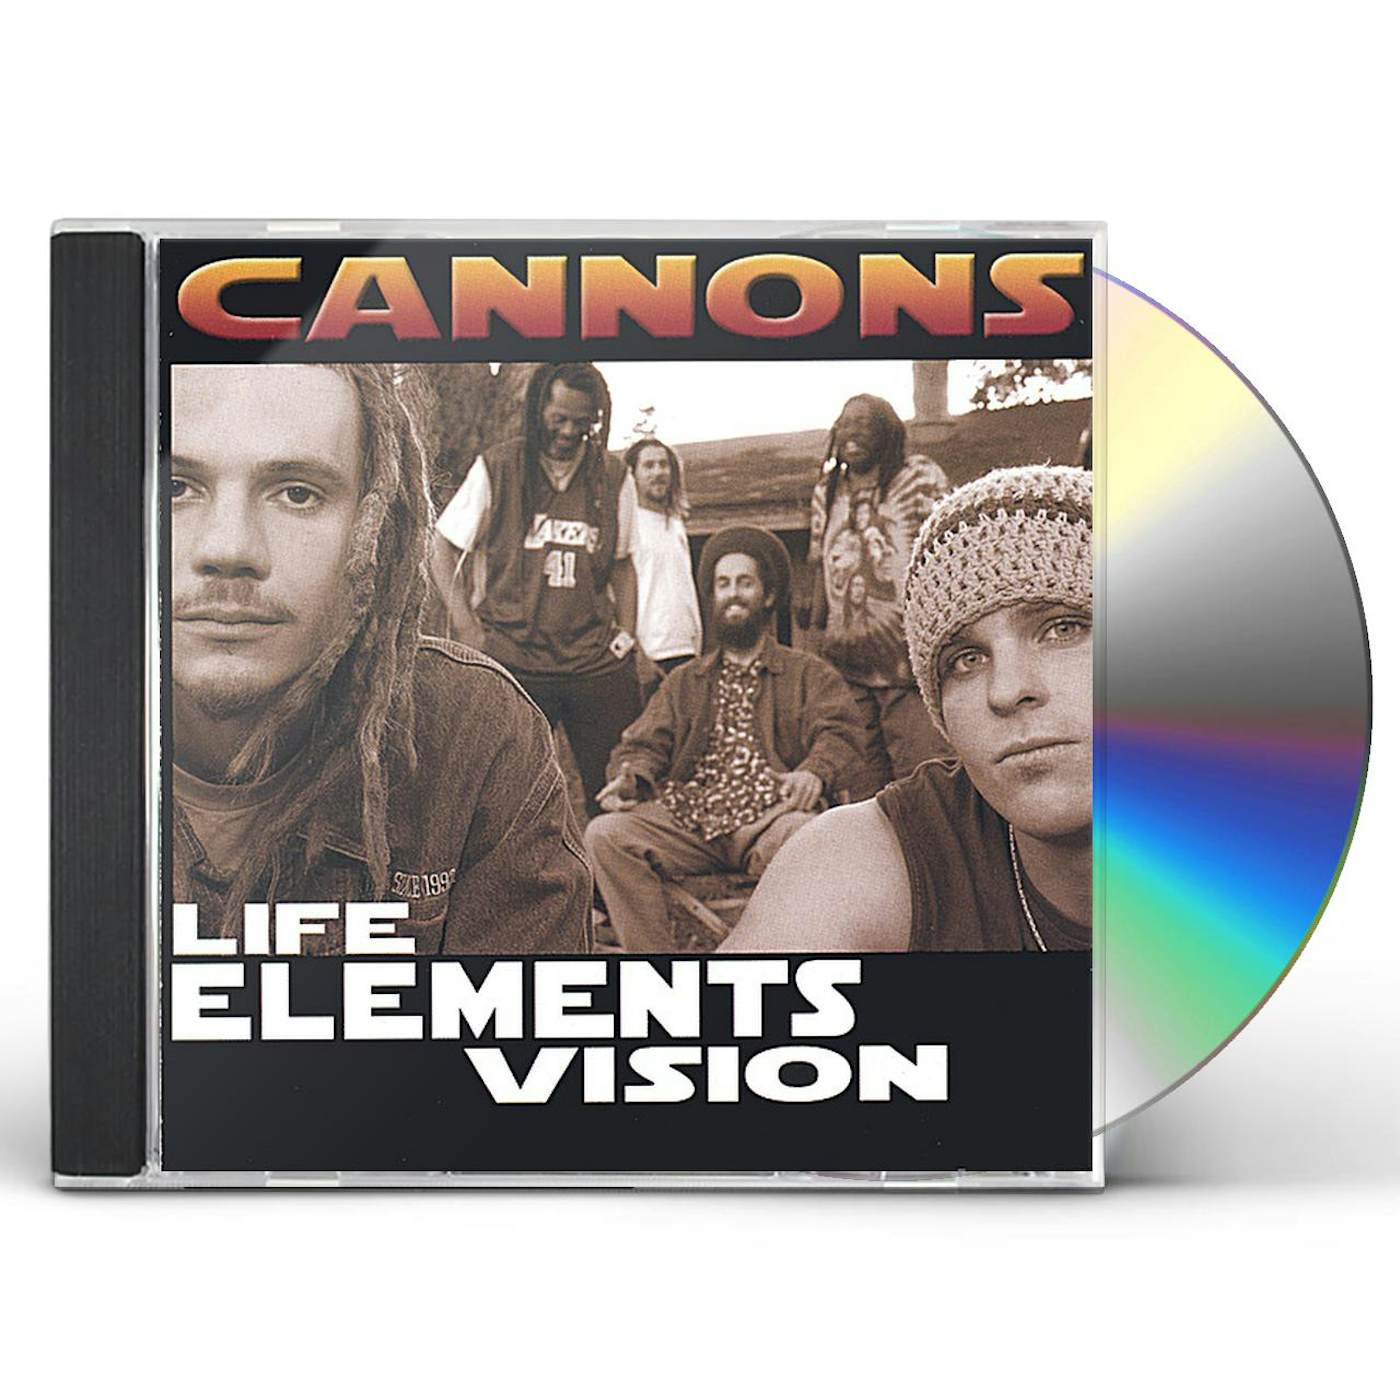 Cannons LIFE ELEMENTS VISION CD